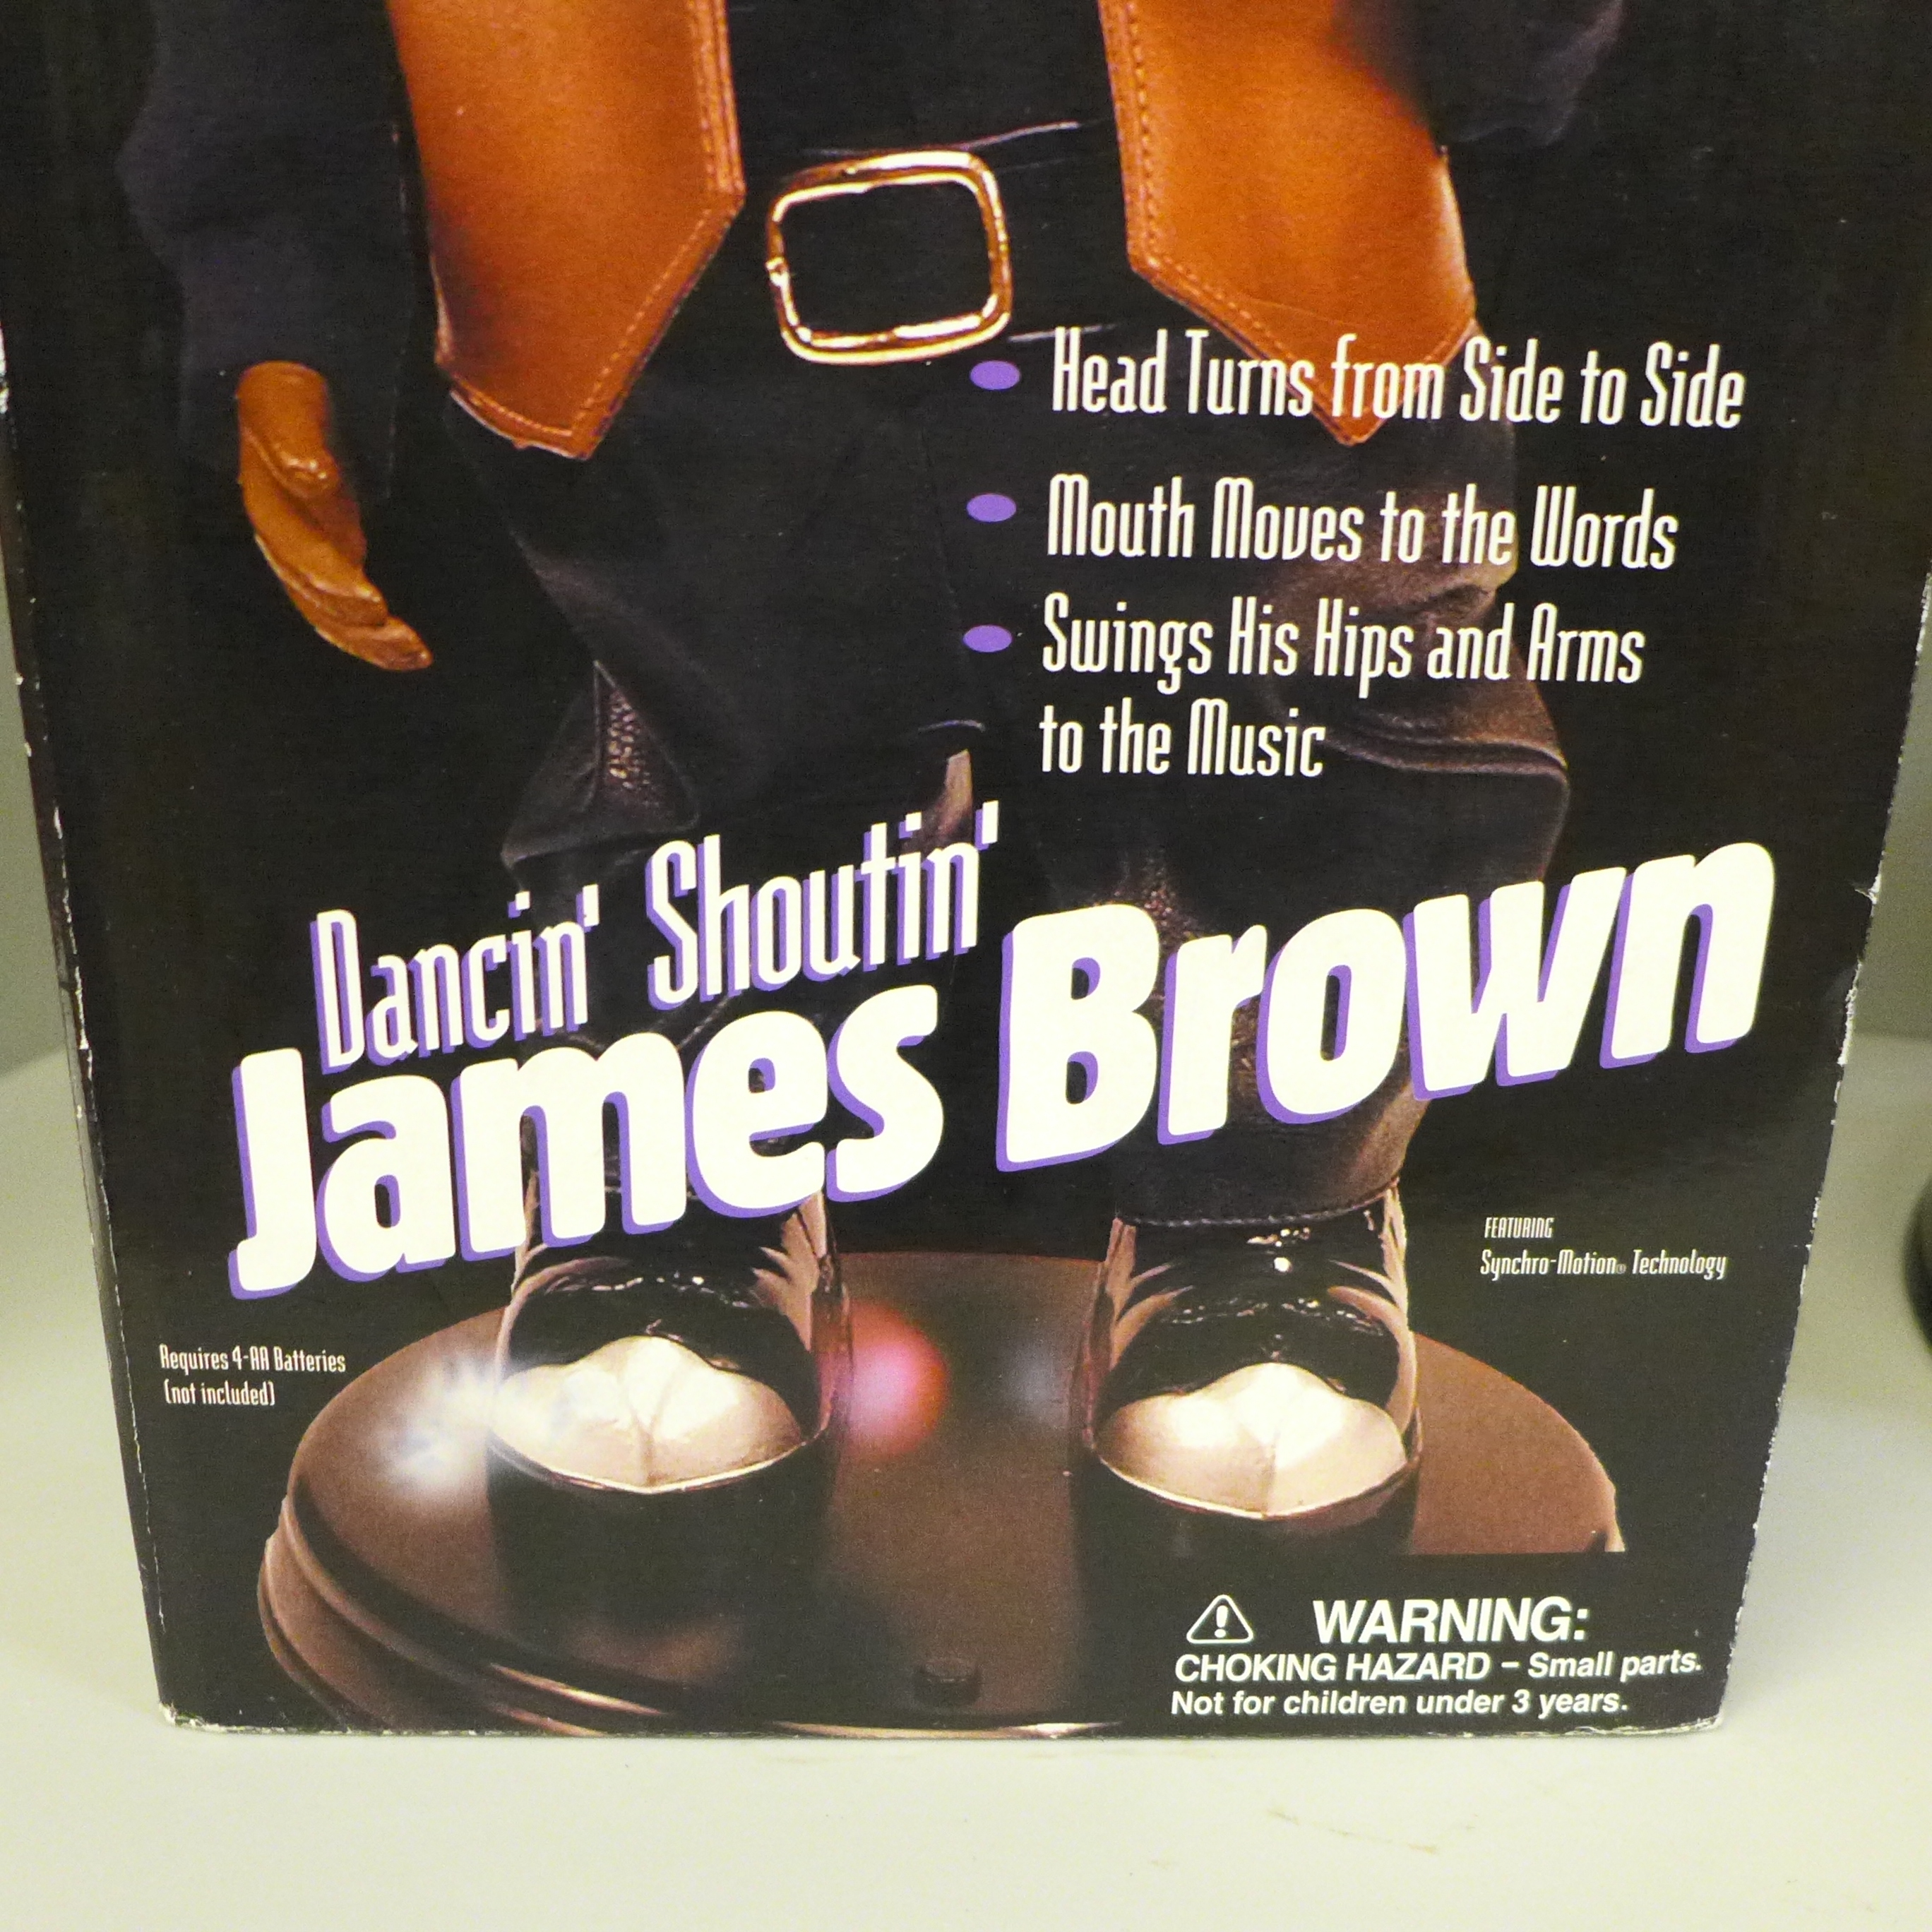 James Brown, Dancin' Shoutin', The Godfather of Soul large model, boxed - Image 4 of 4